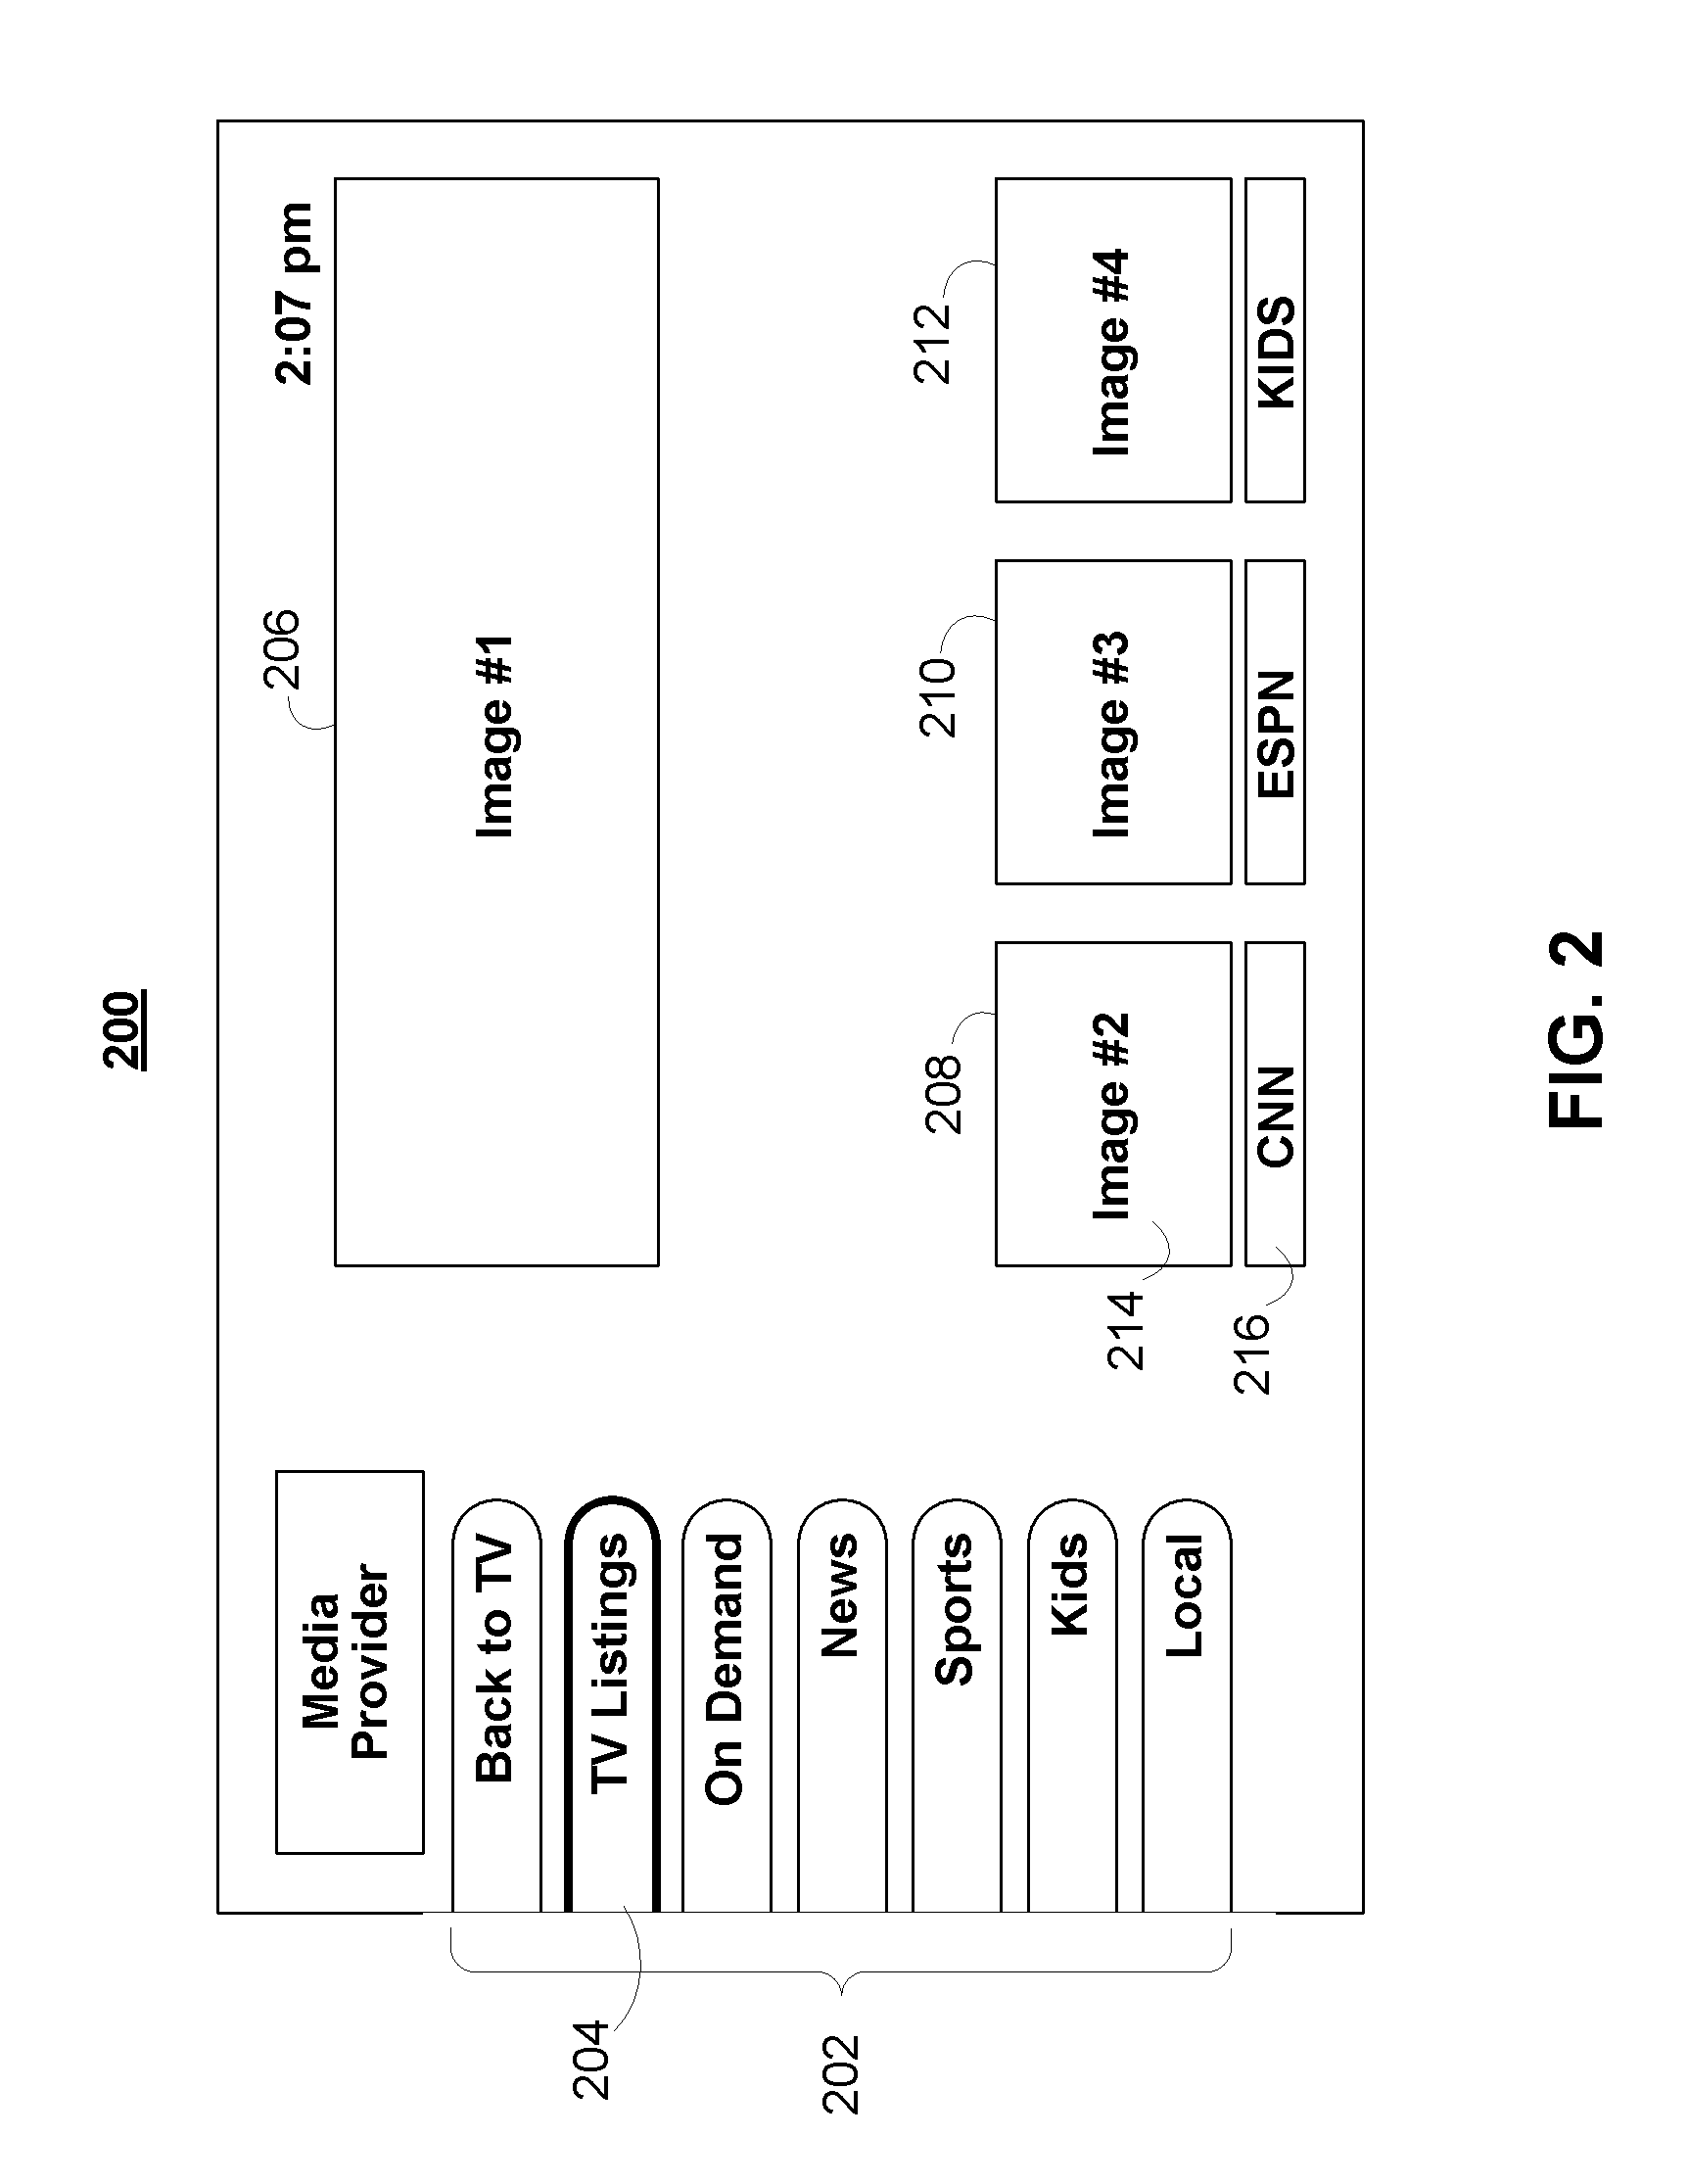 Systems and methods for multiple media guidance application navigation